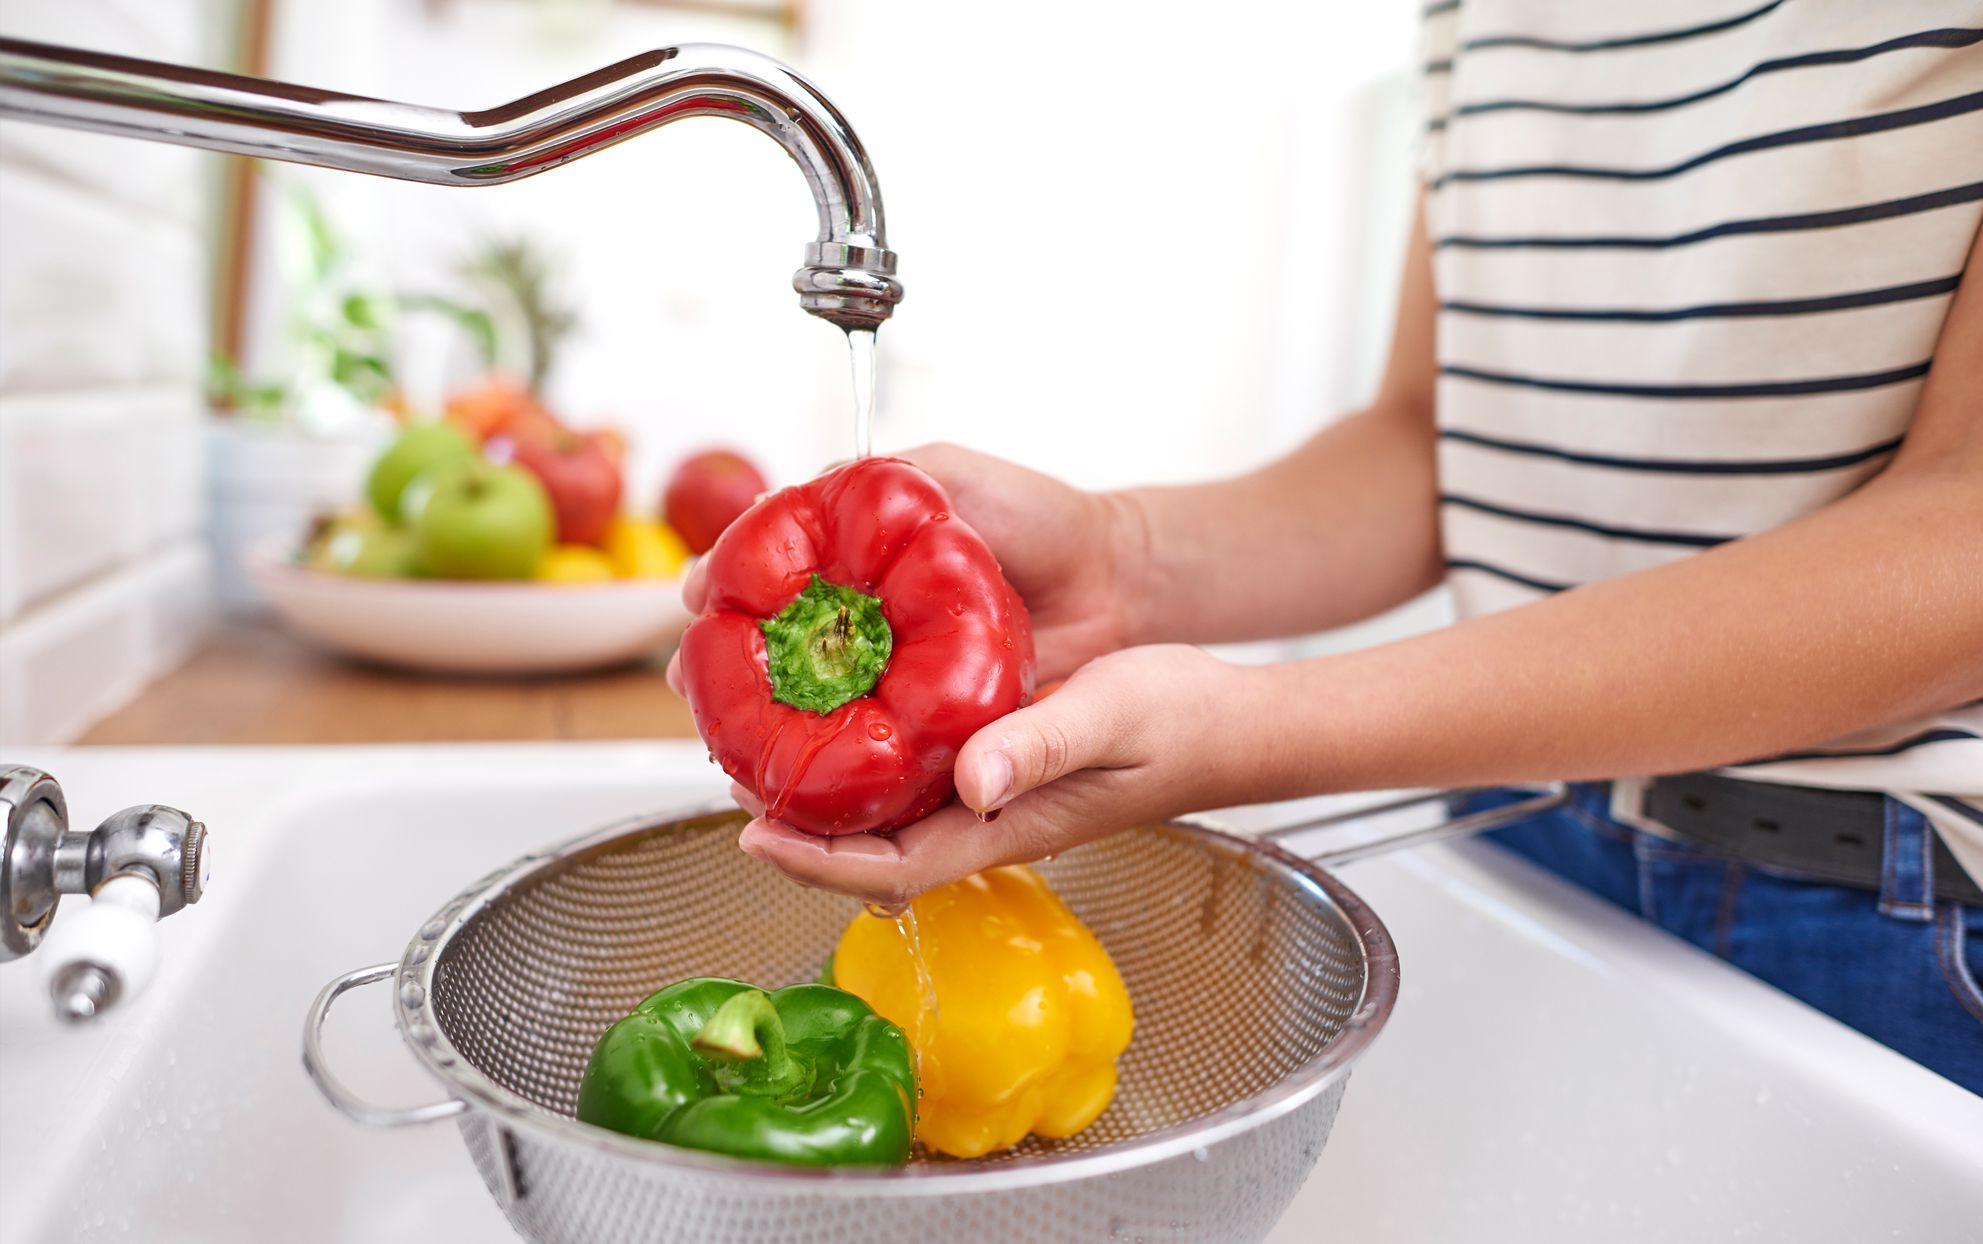 Here are Some Tips for Washing Fruits and Vegetables: